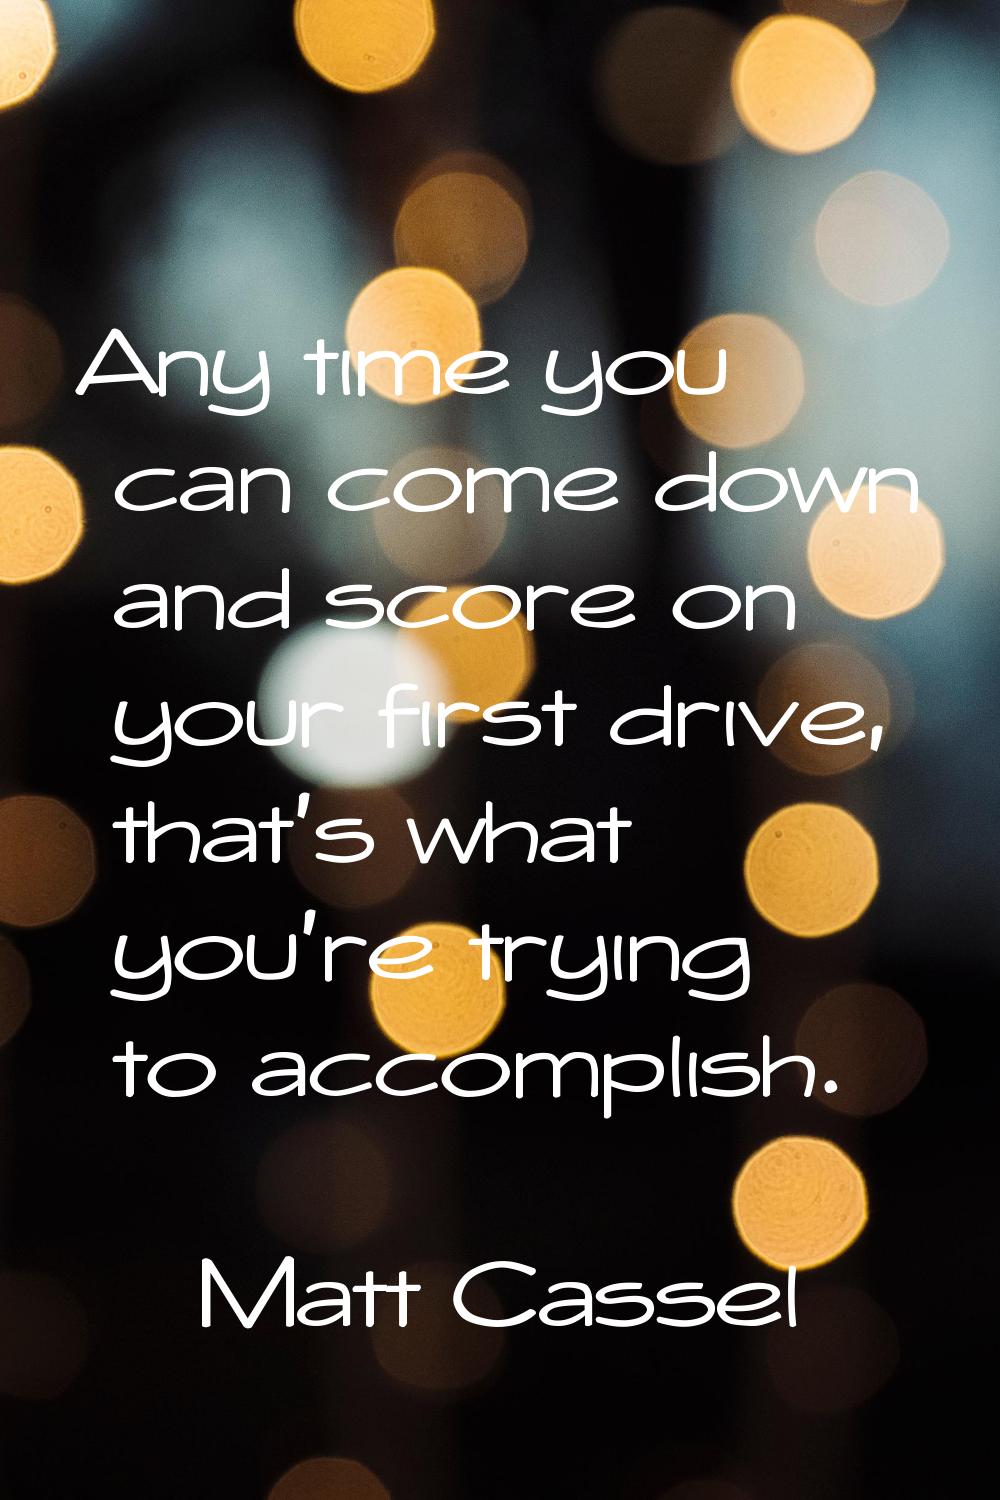 Any time you can come down and score on your first drive, that's what you're trying to accomplish.